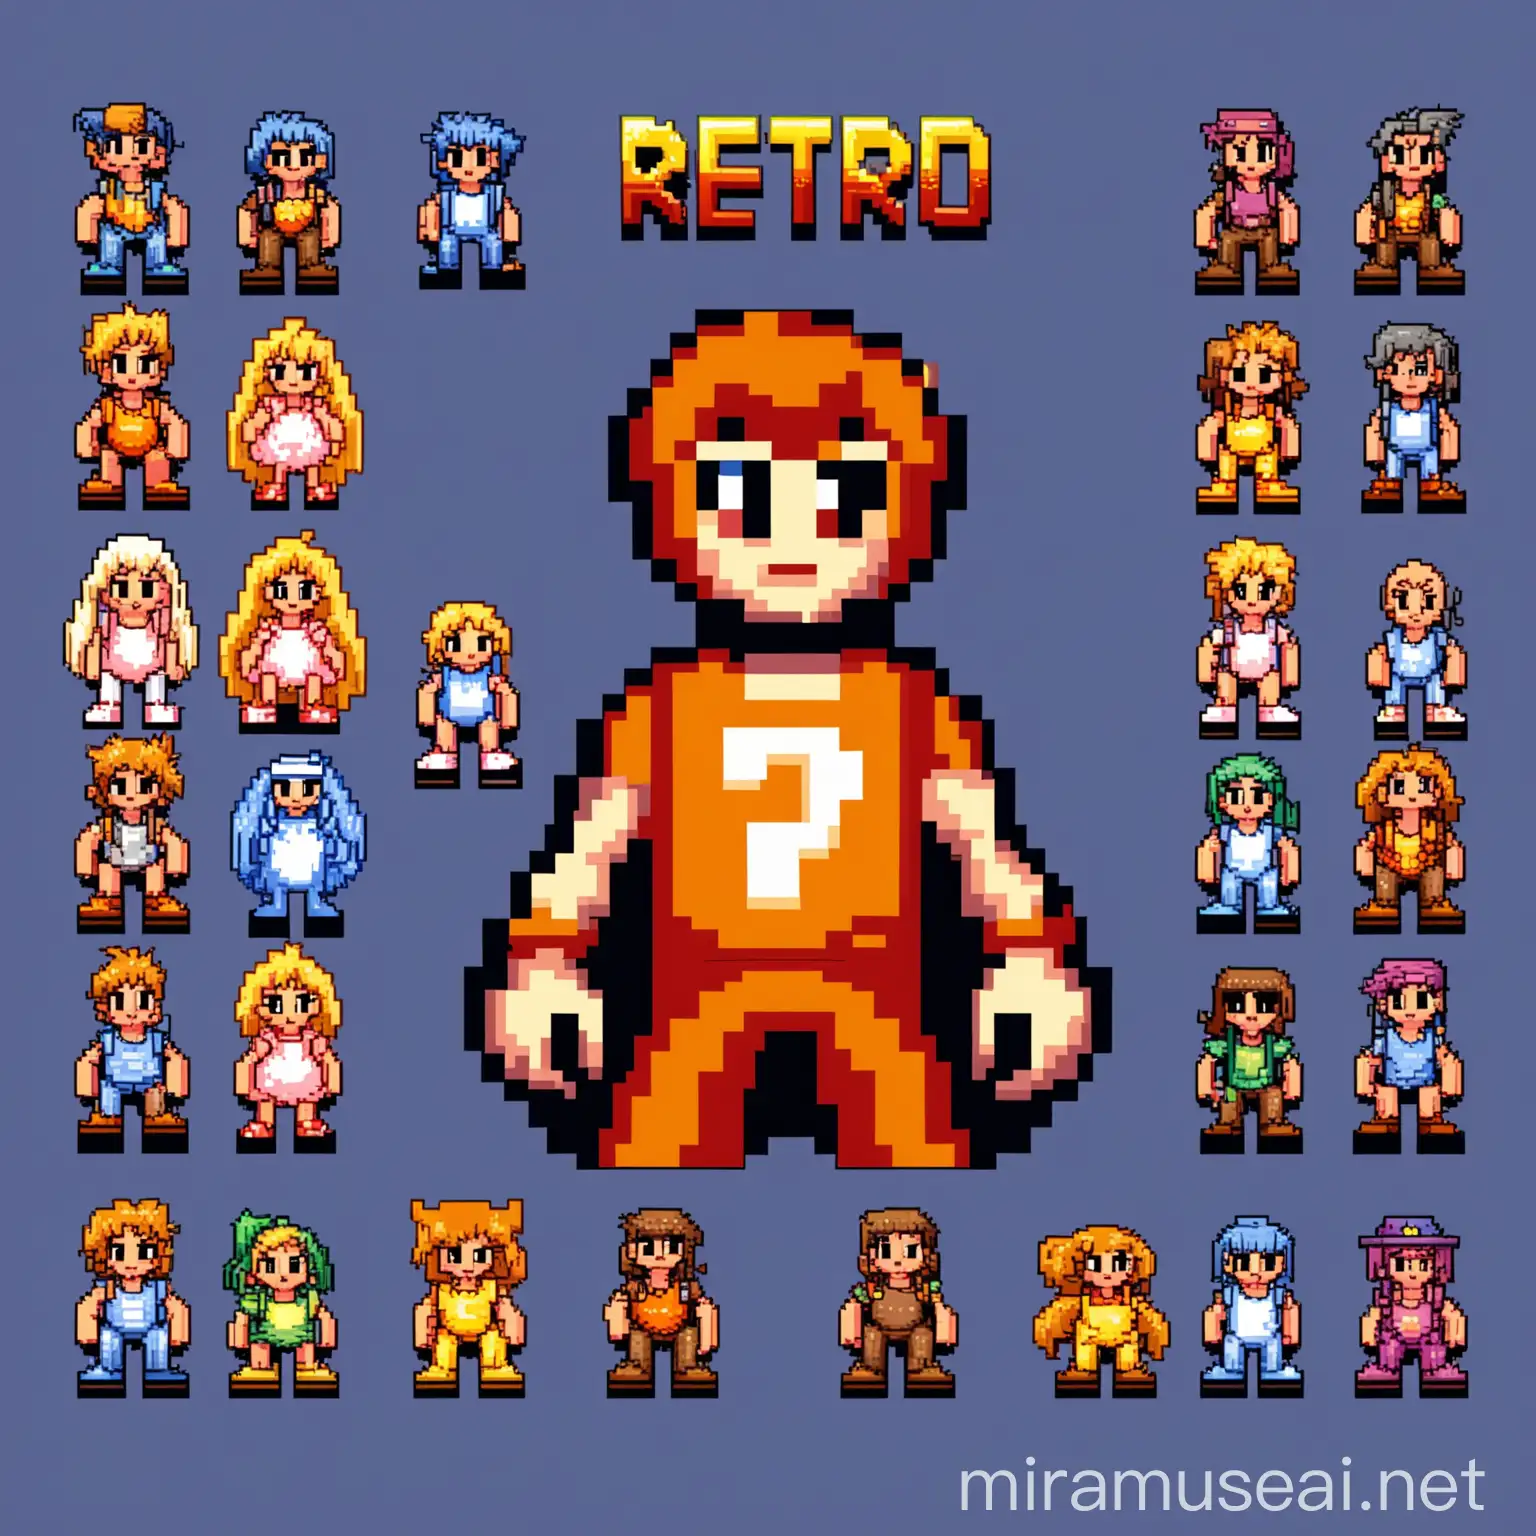 Playable character in pixel retro game